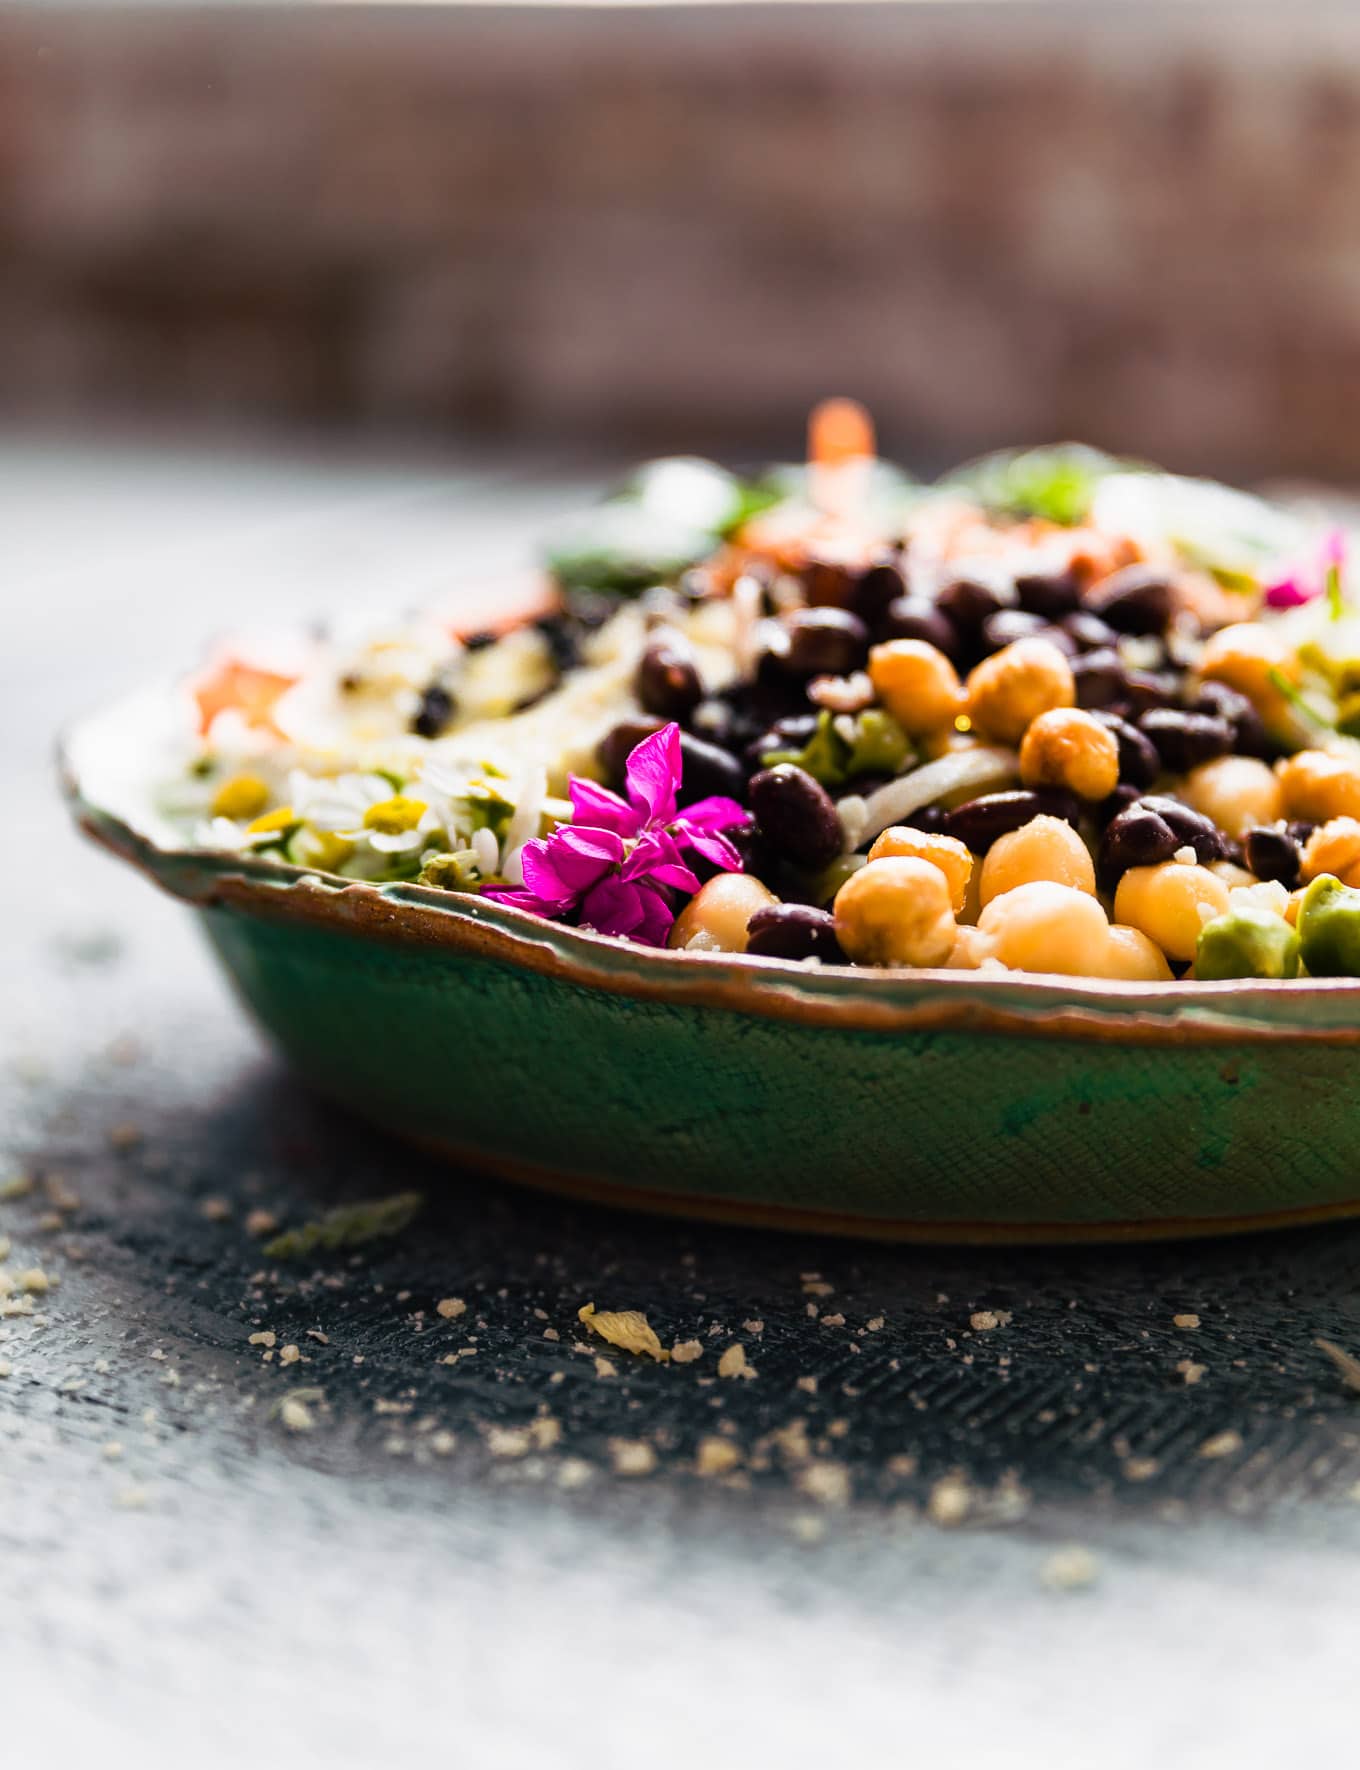 Side view turquoise bowl filled with lentils and salad ingredients